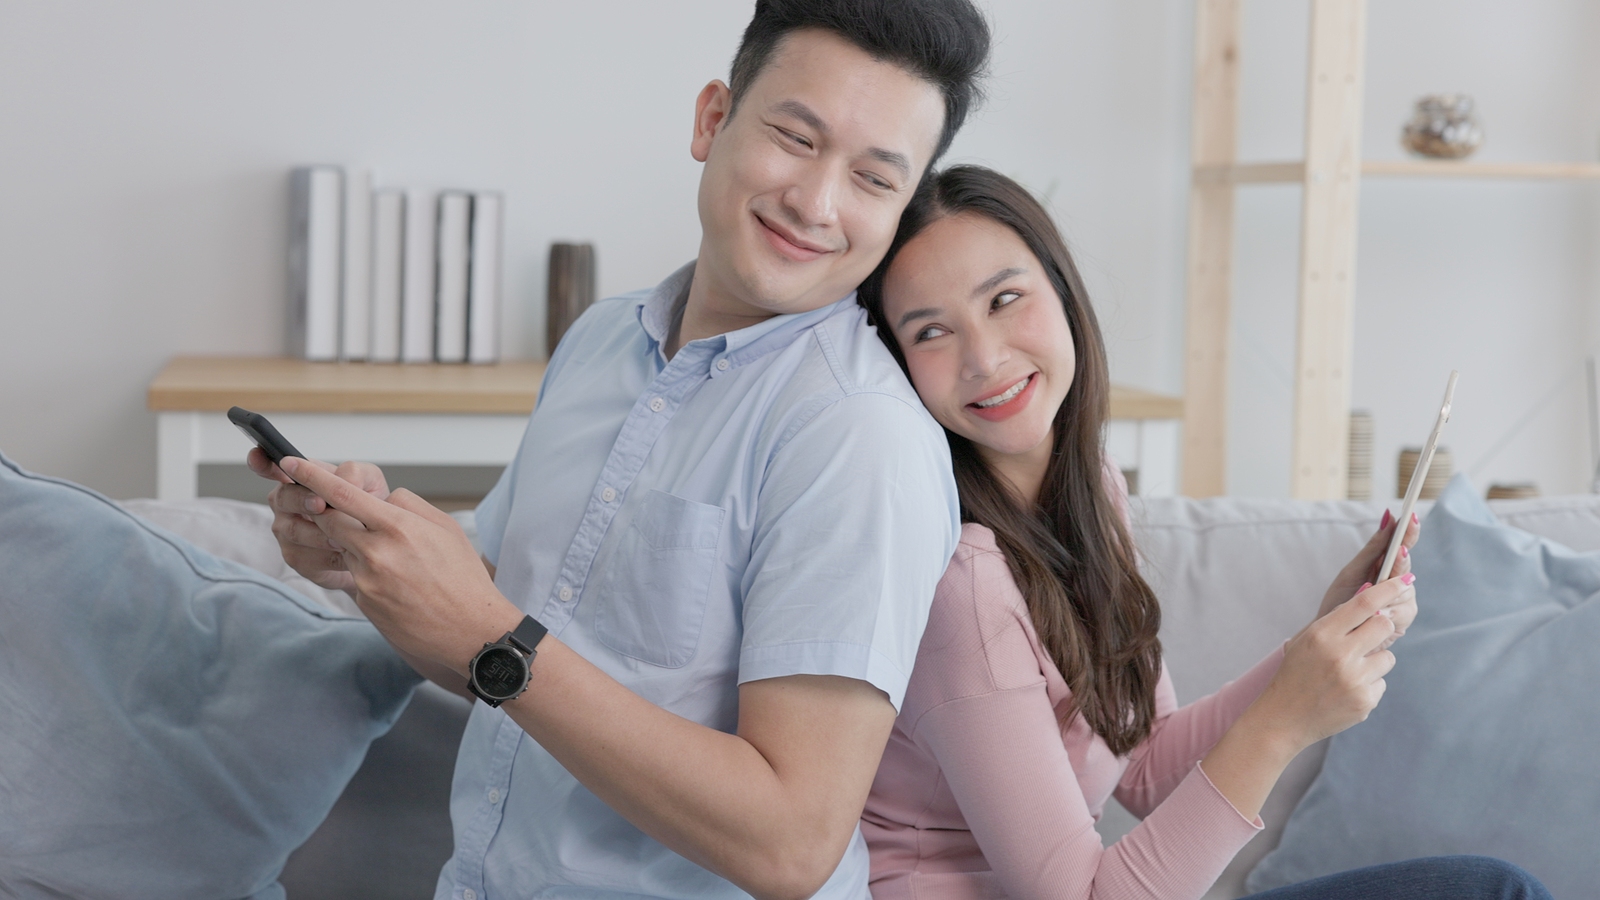 An attractive asian couple sits on the couch back to back smiling looking over eachothers shoulders holding each a cellphone.